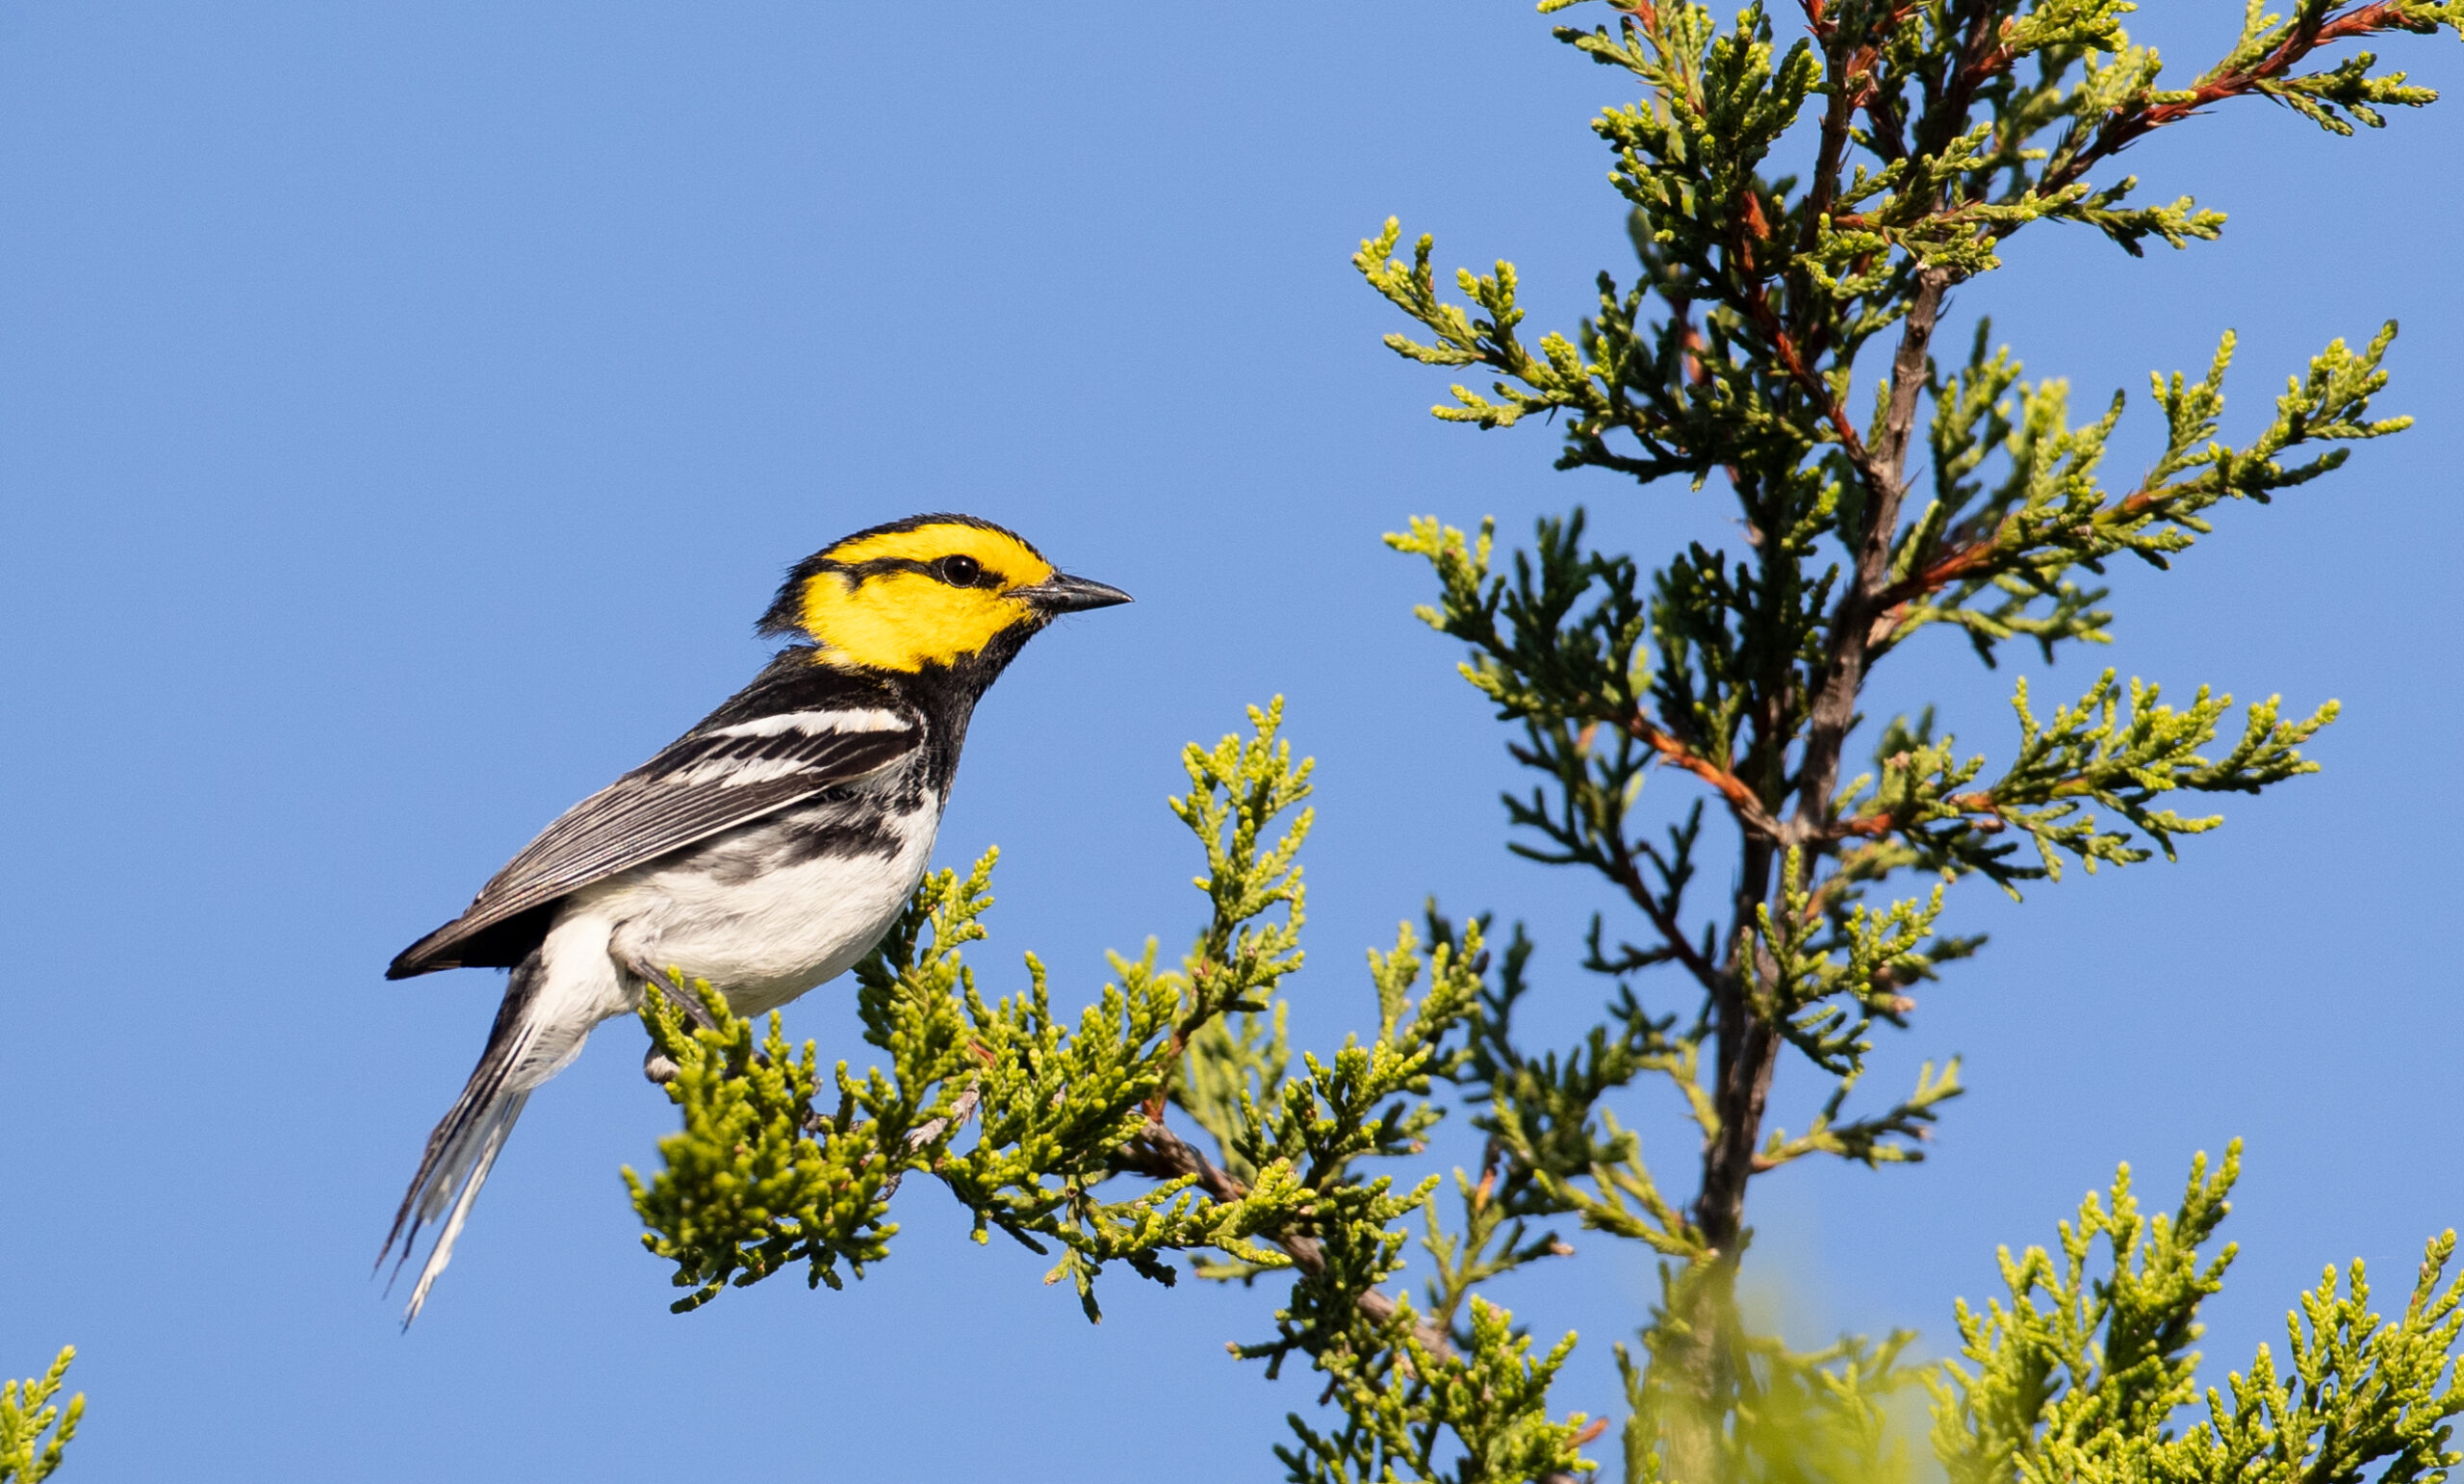 Golden cheeked warbler sitting on a tree branch against a blue background.